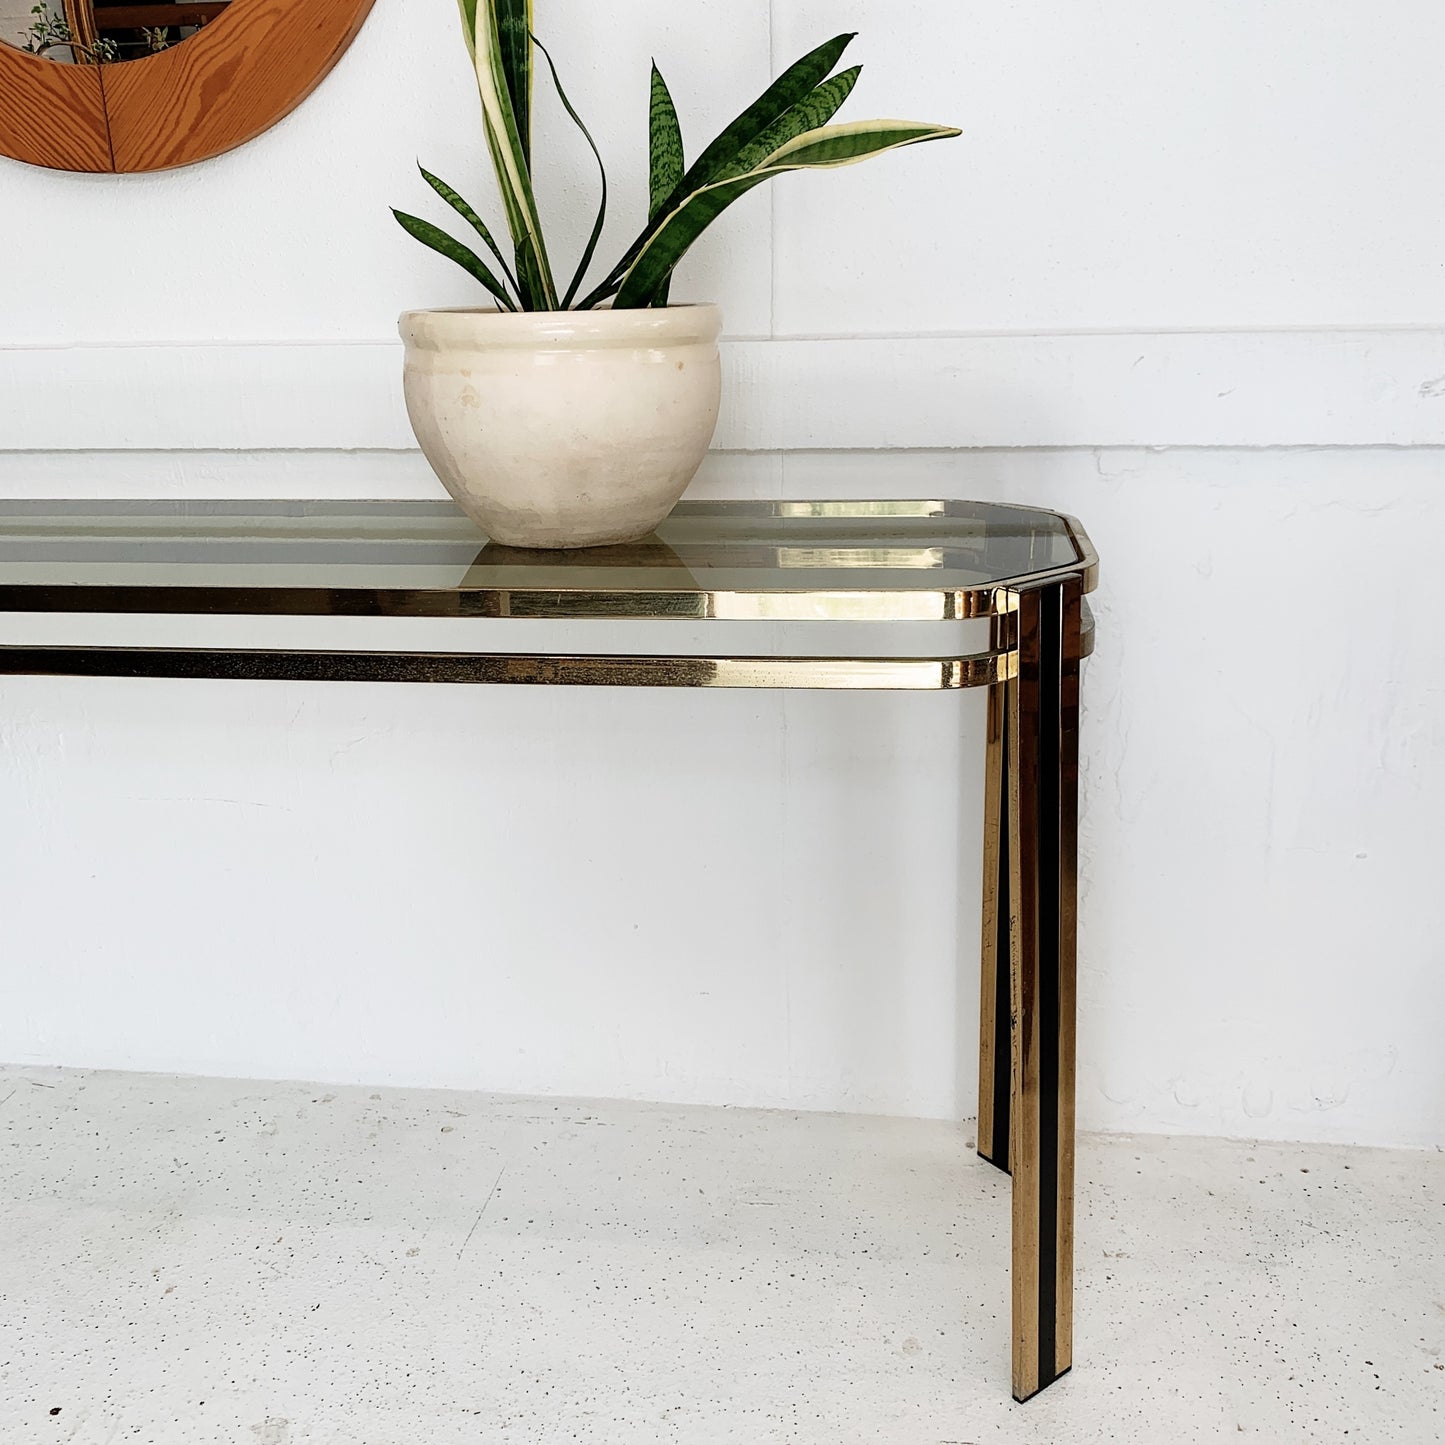 Vintage Italian Plated Console Table